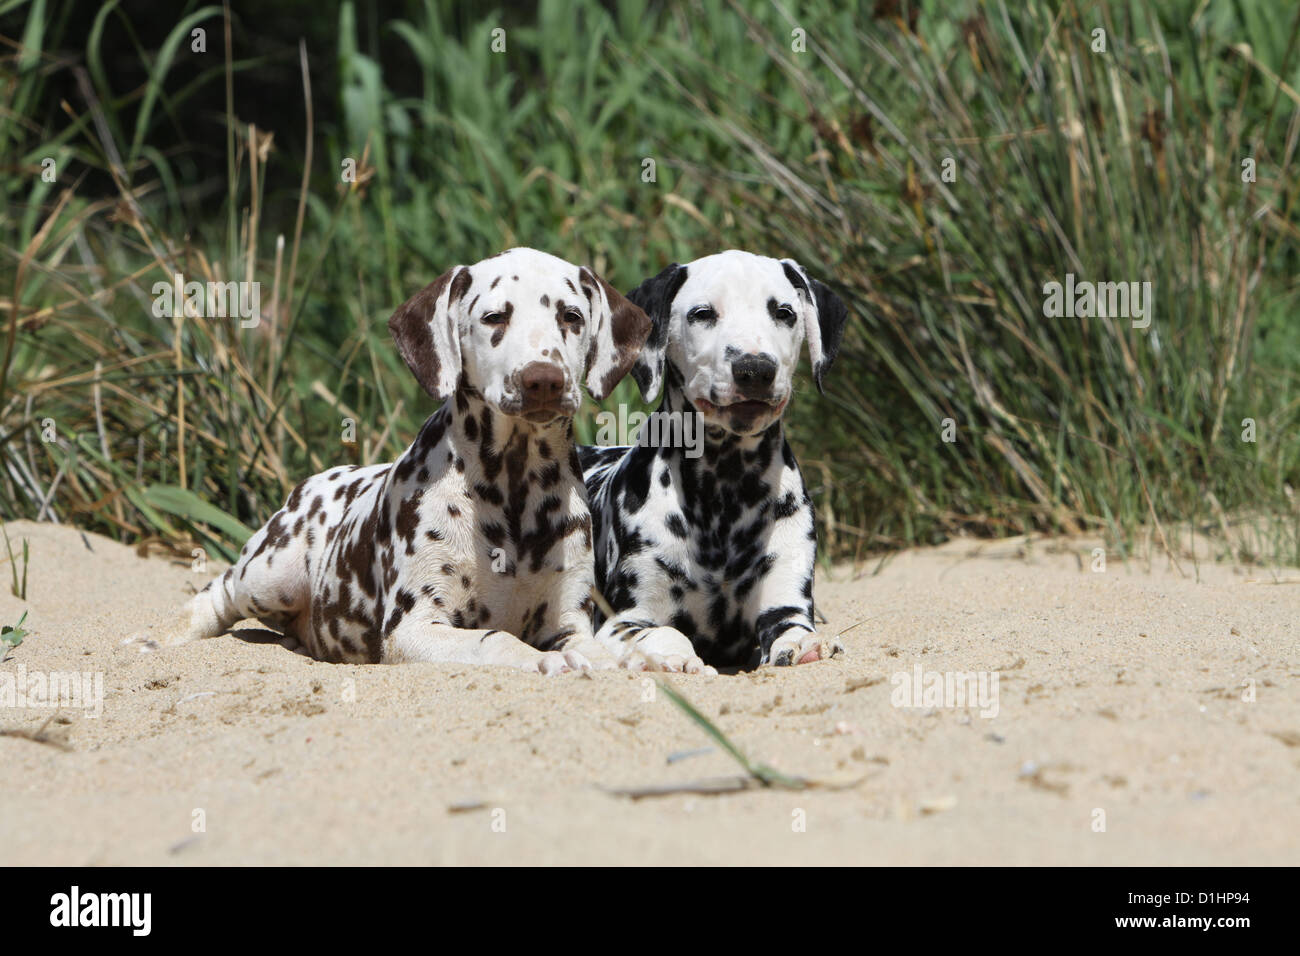 Dog Dalmatian / Dalmatiner / Dalmatien two puppies different colors lying on the sand Stock Photo